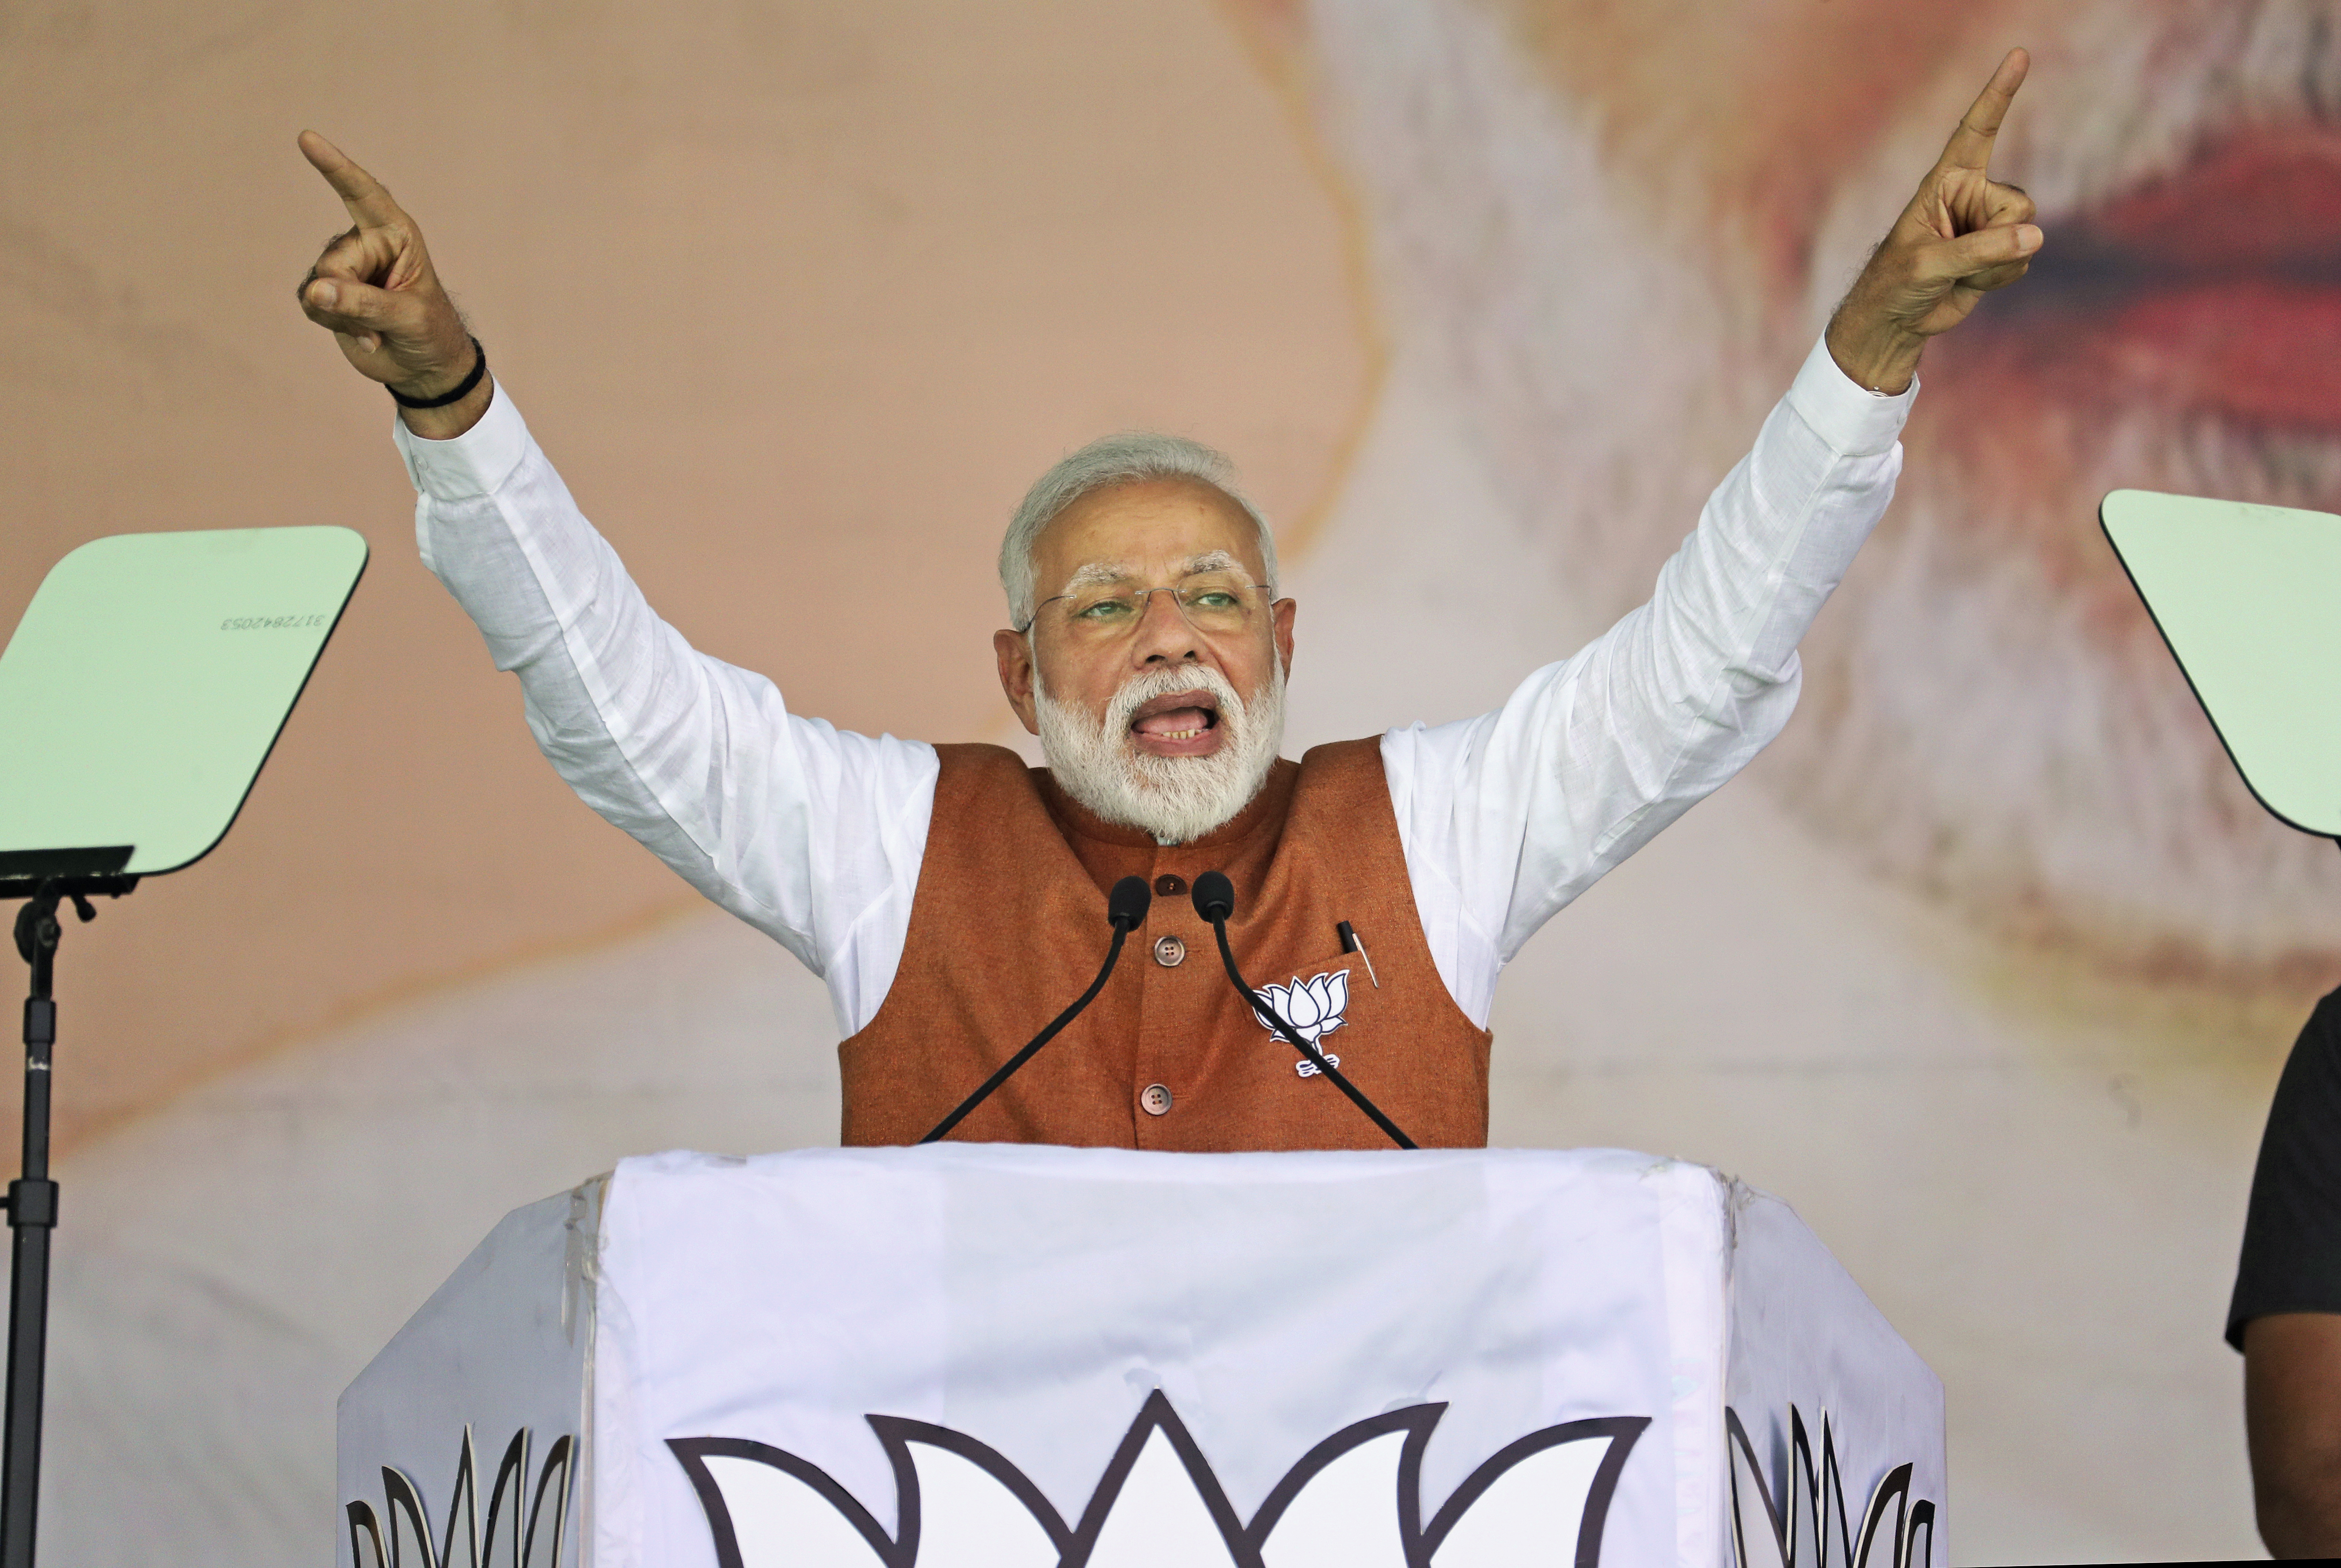 PM Narendra Modi addresses the Vijay Sankalp rally in Meerut on Thursday. At the rally, he said his government had carried out surgical strikes in all spheres — land, sky and space.